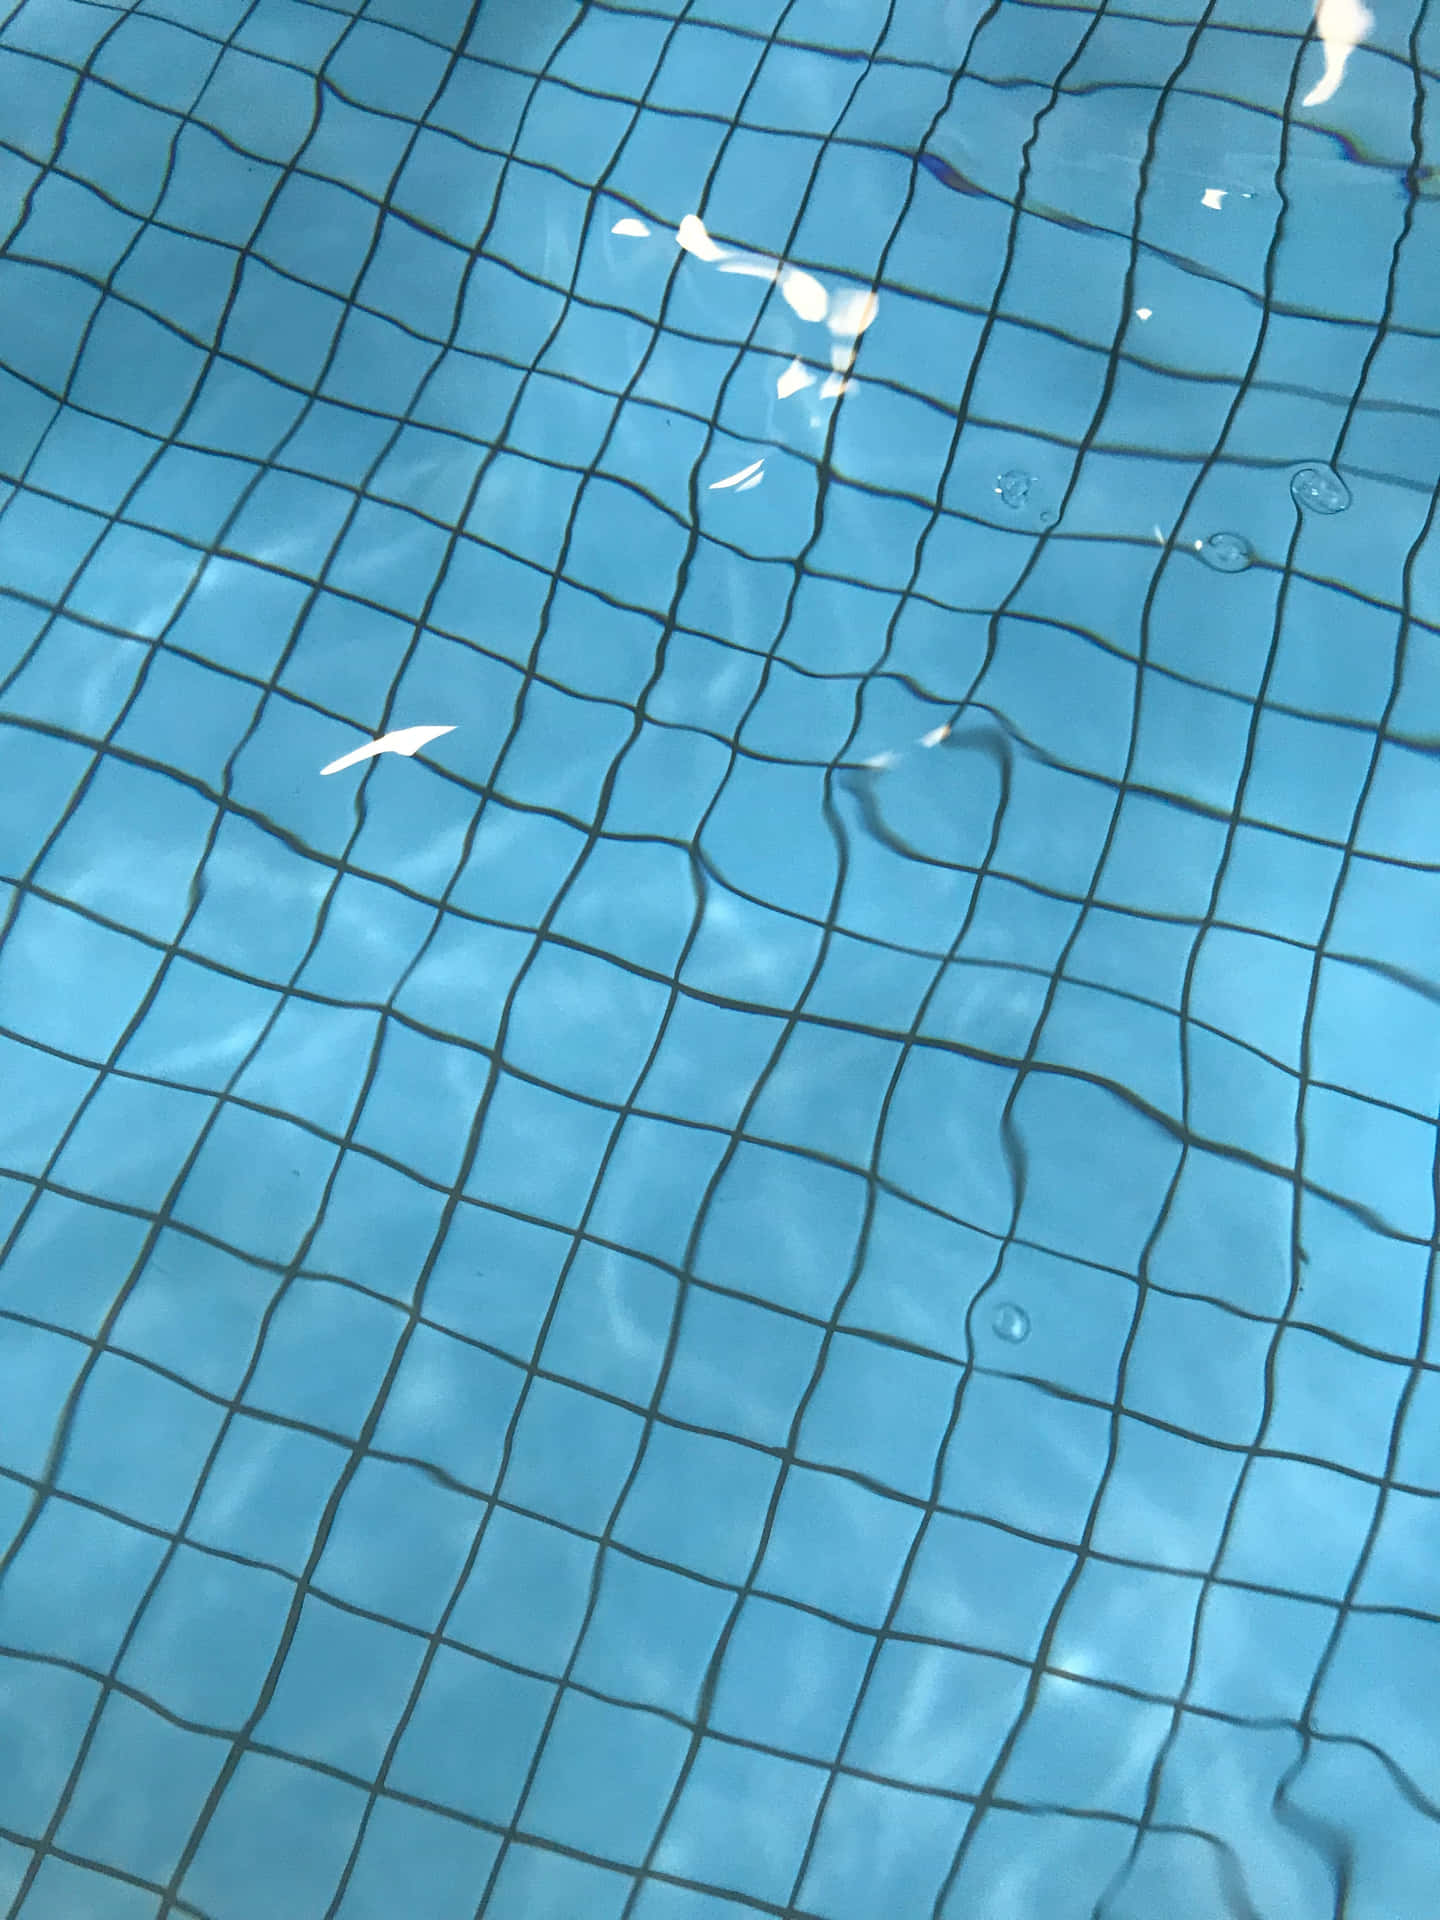 A Close Up Of A Swimming Pool With A Net